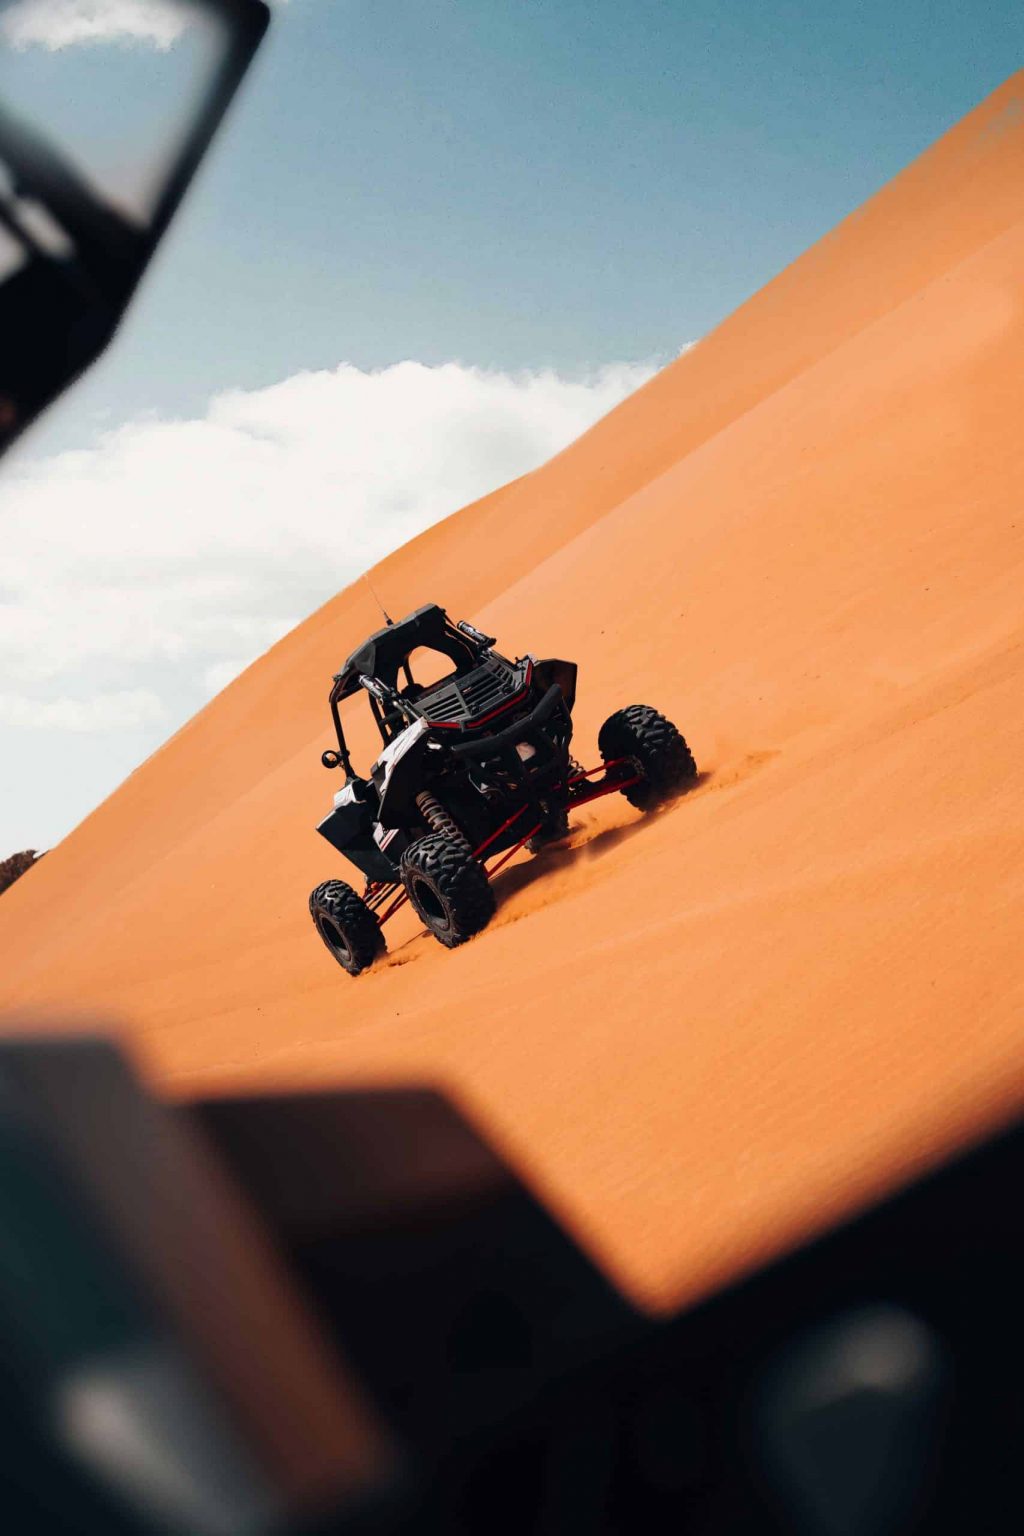 Explore The Desert In Style: Quad Bike Rental For Adventure Seekers